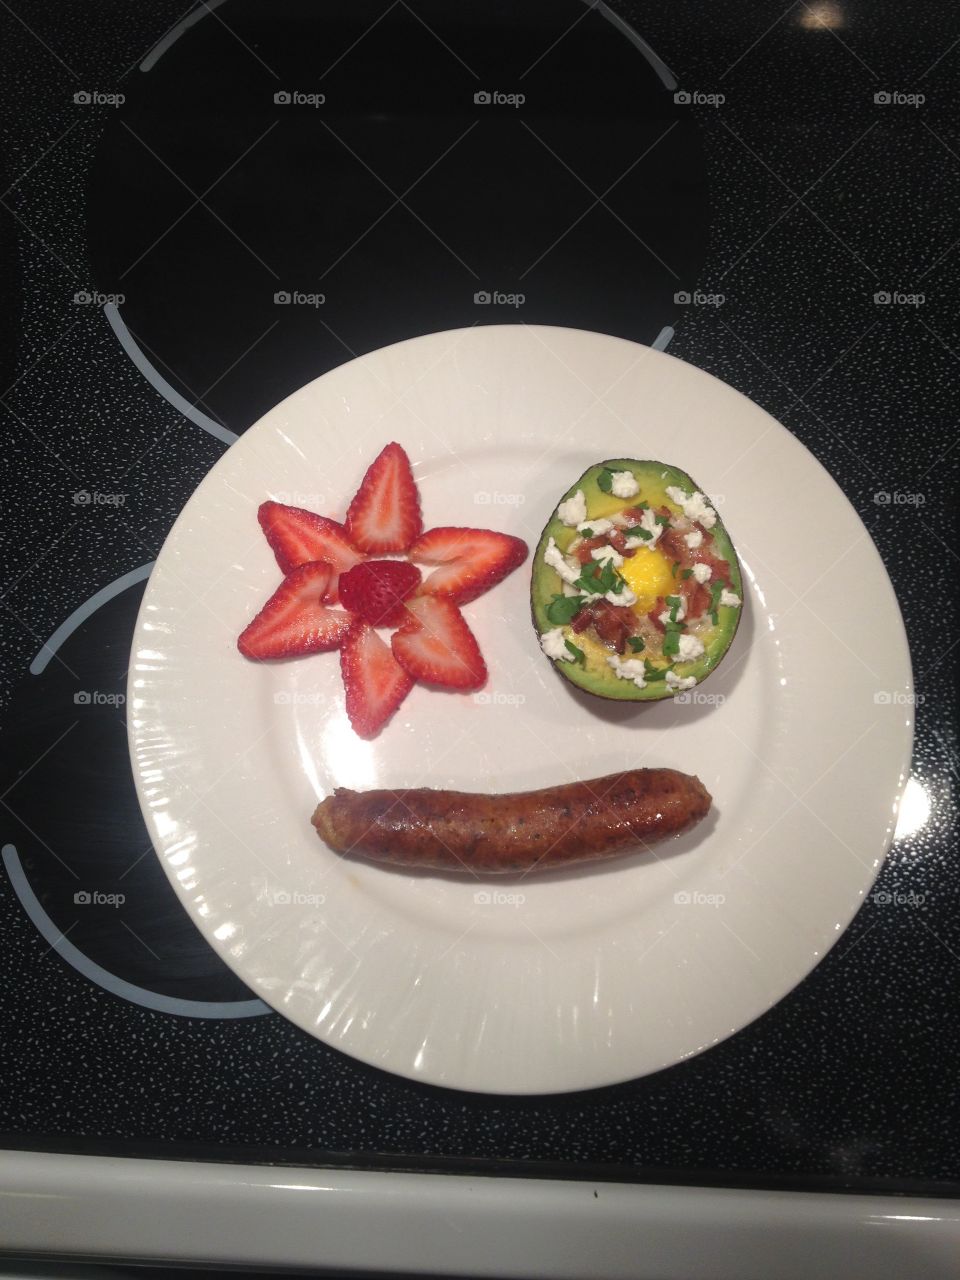 My breakfast has a face! Baked egg in an avocado with sliced strawberries and farm fresh local turkey sausage. 